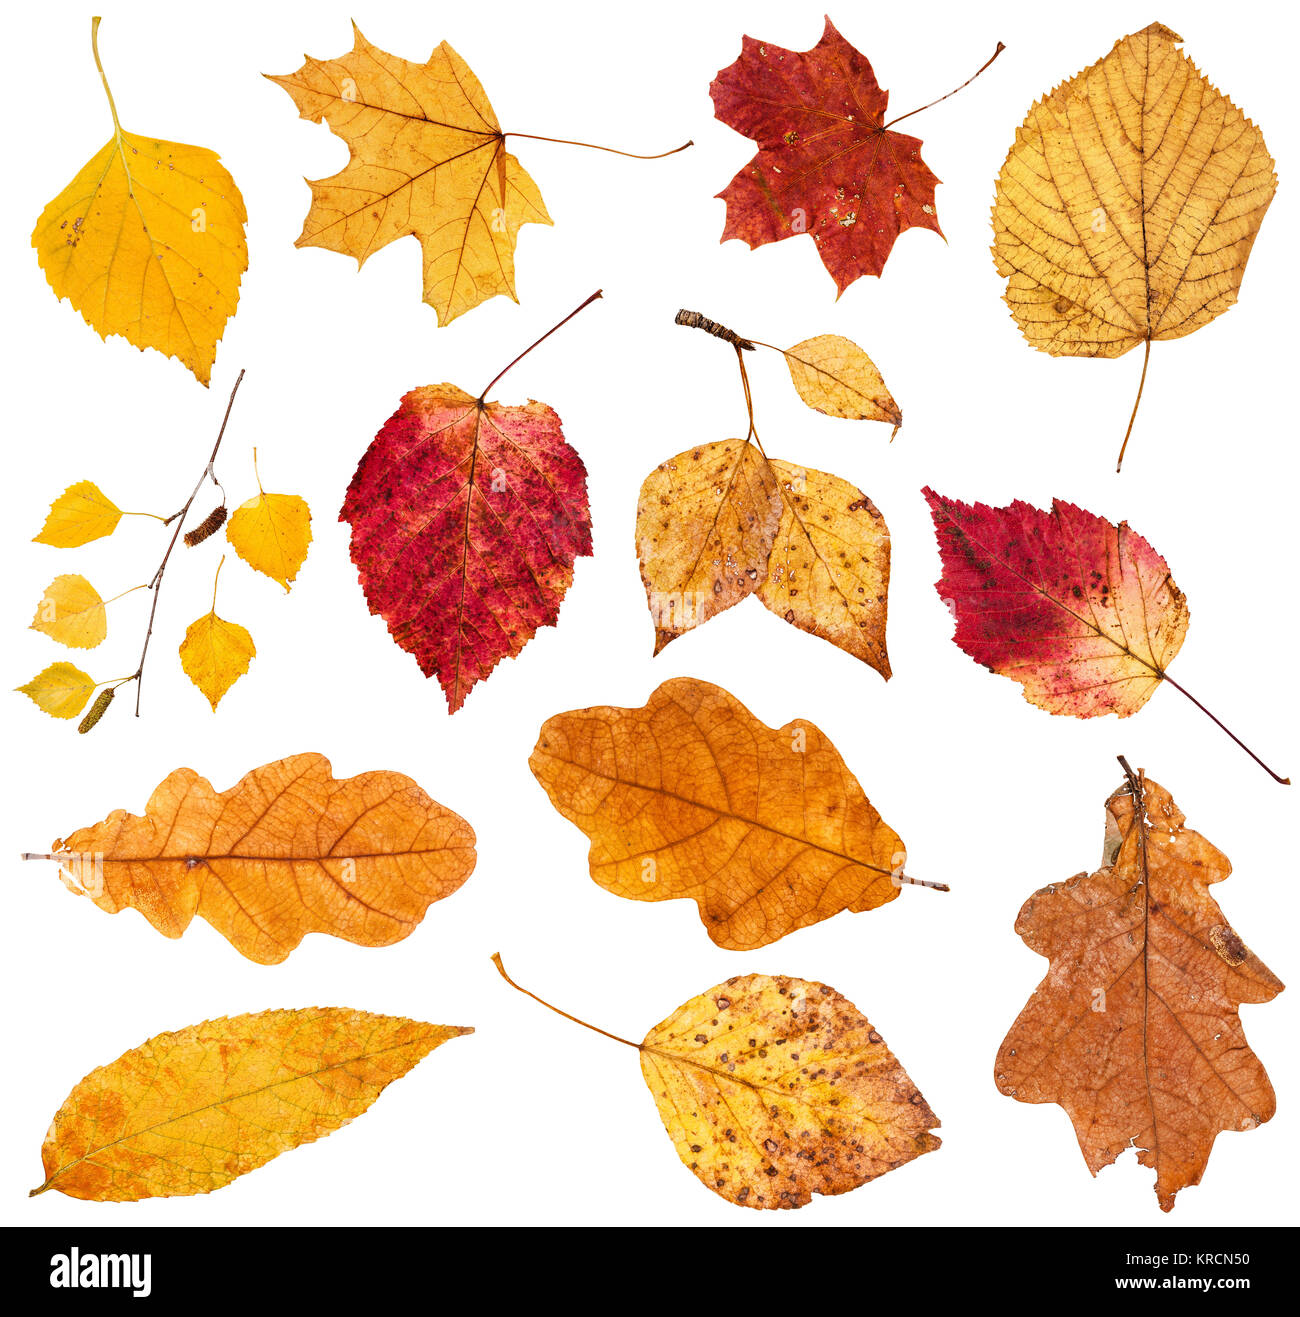 collage from various fallen leaves isolated Stock Photo